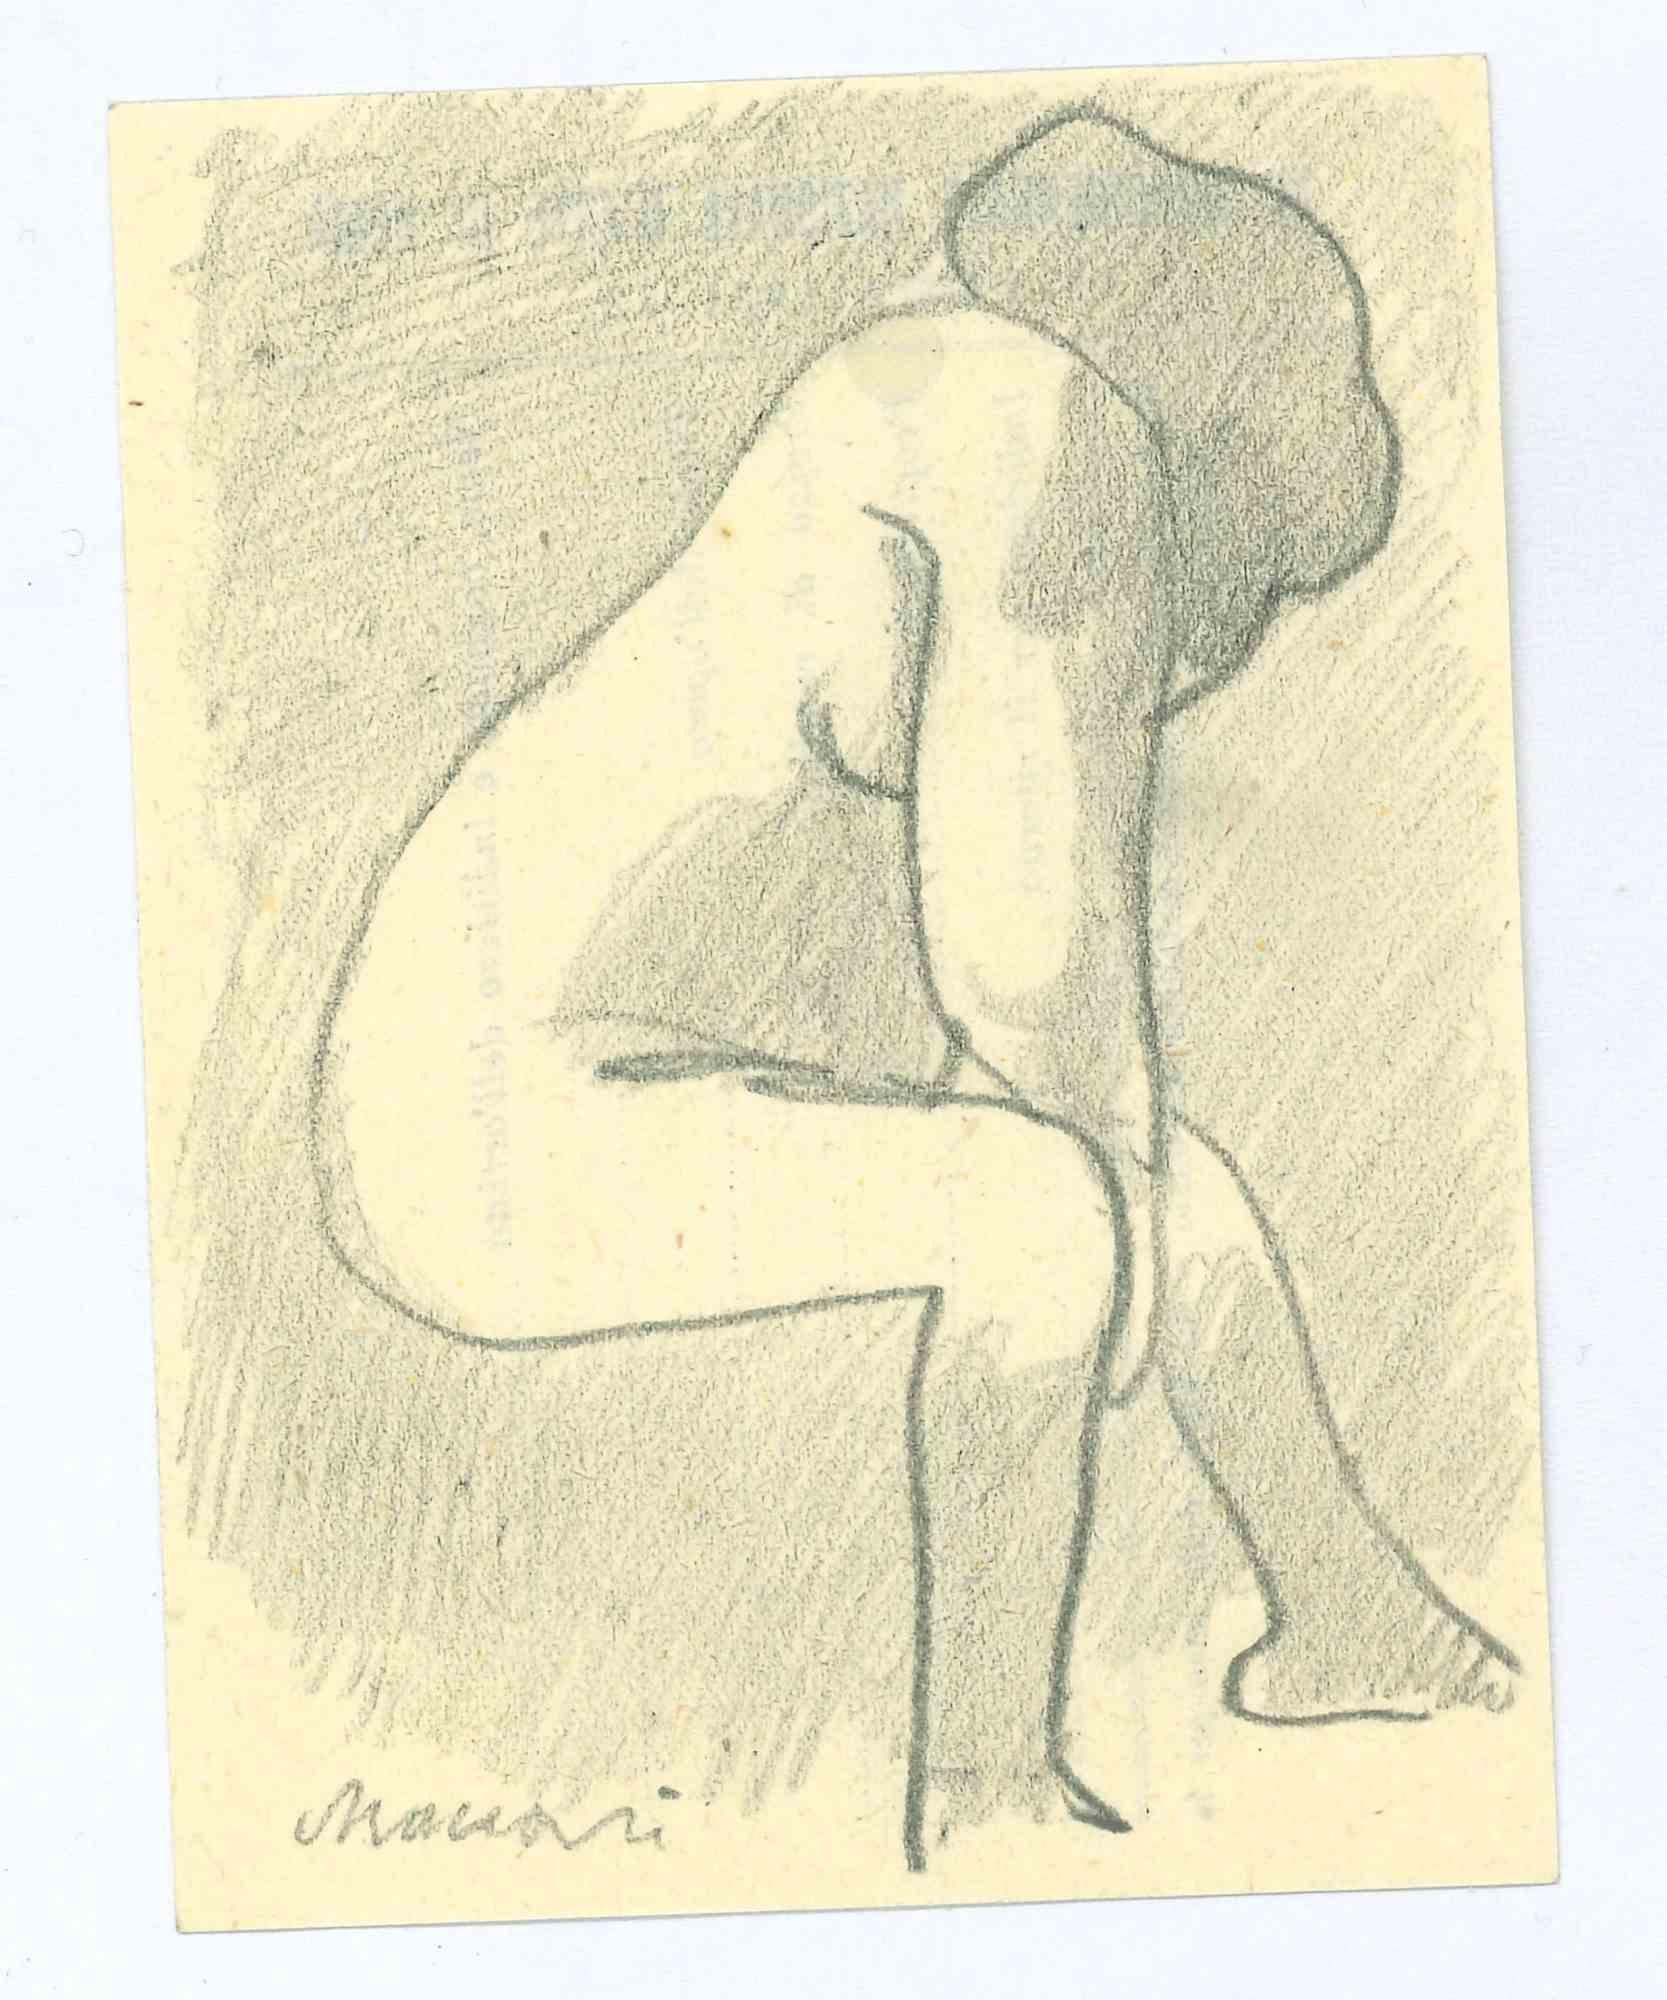 The Nude is a Pencil Drawing realized by Mino Maccari  (1924-1989) in the 1960s.

Hand-signed on the lower.

Good condition.

Mino Maccari (Siena, 1924-Rome, June 16, 1989) was an Italian writer, painter, engraver and journalist, winner of the